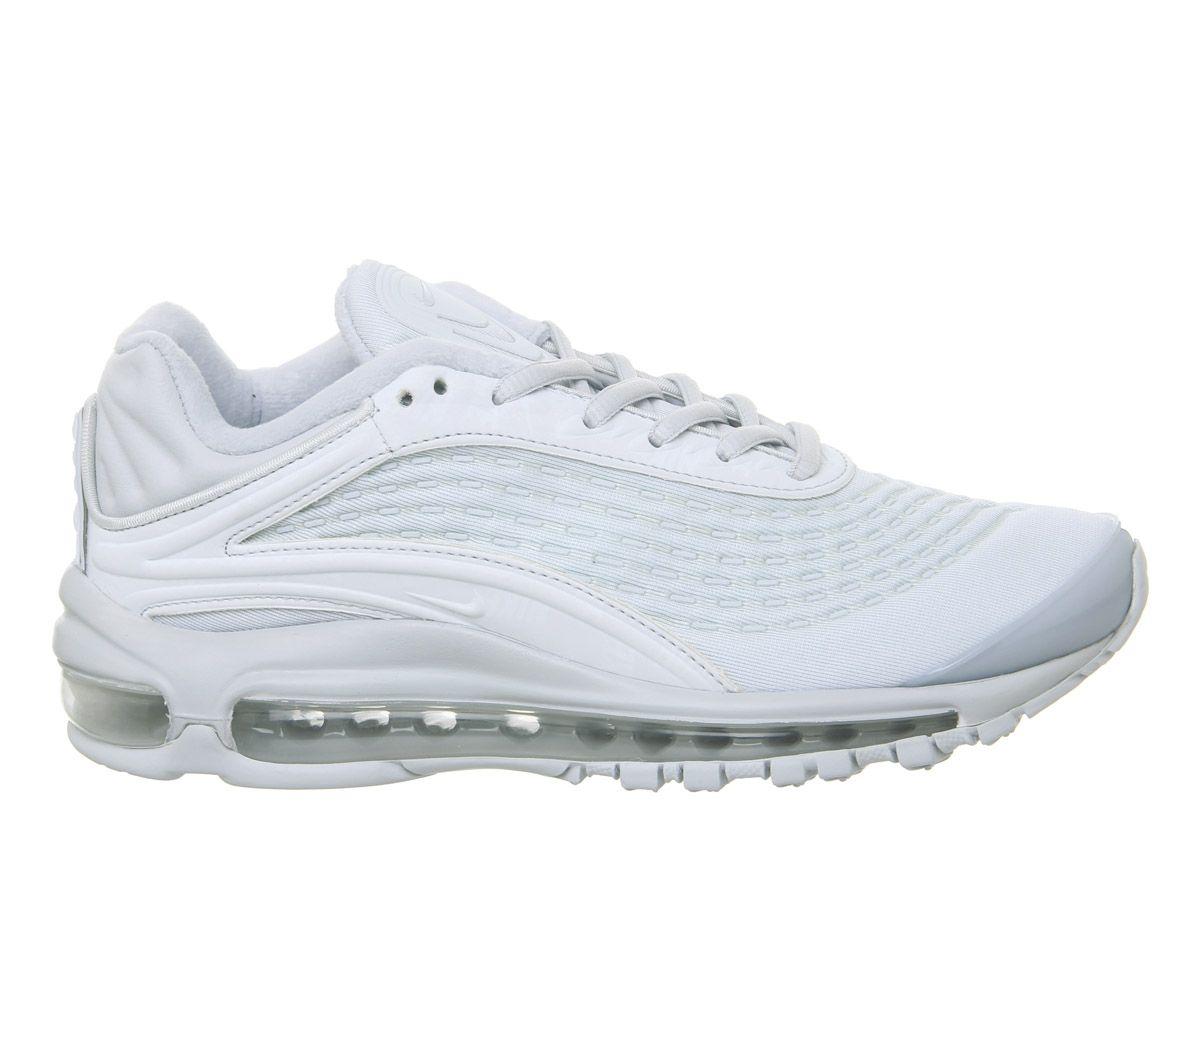 Nike Rubber Air Max Deluxe Trainers - Lyst